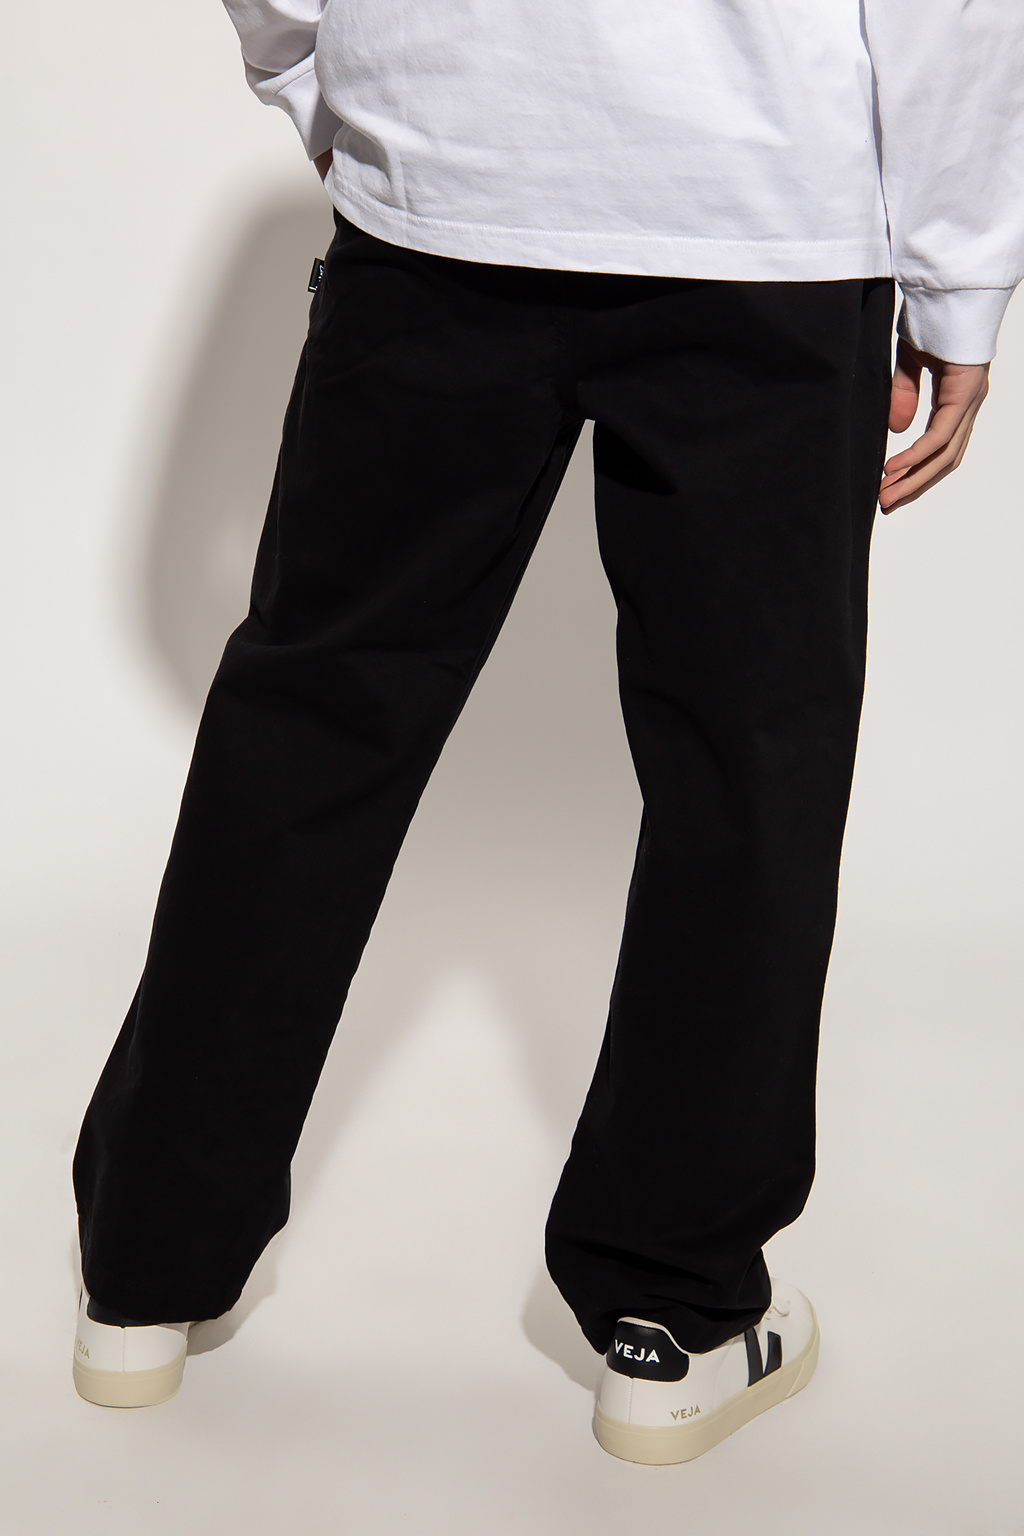 Stussy Cotton trousers